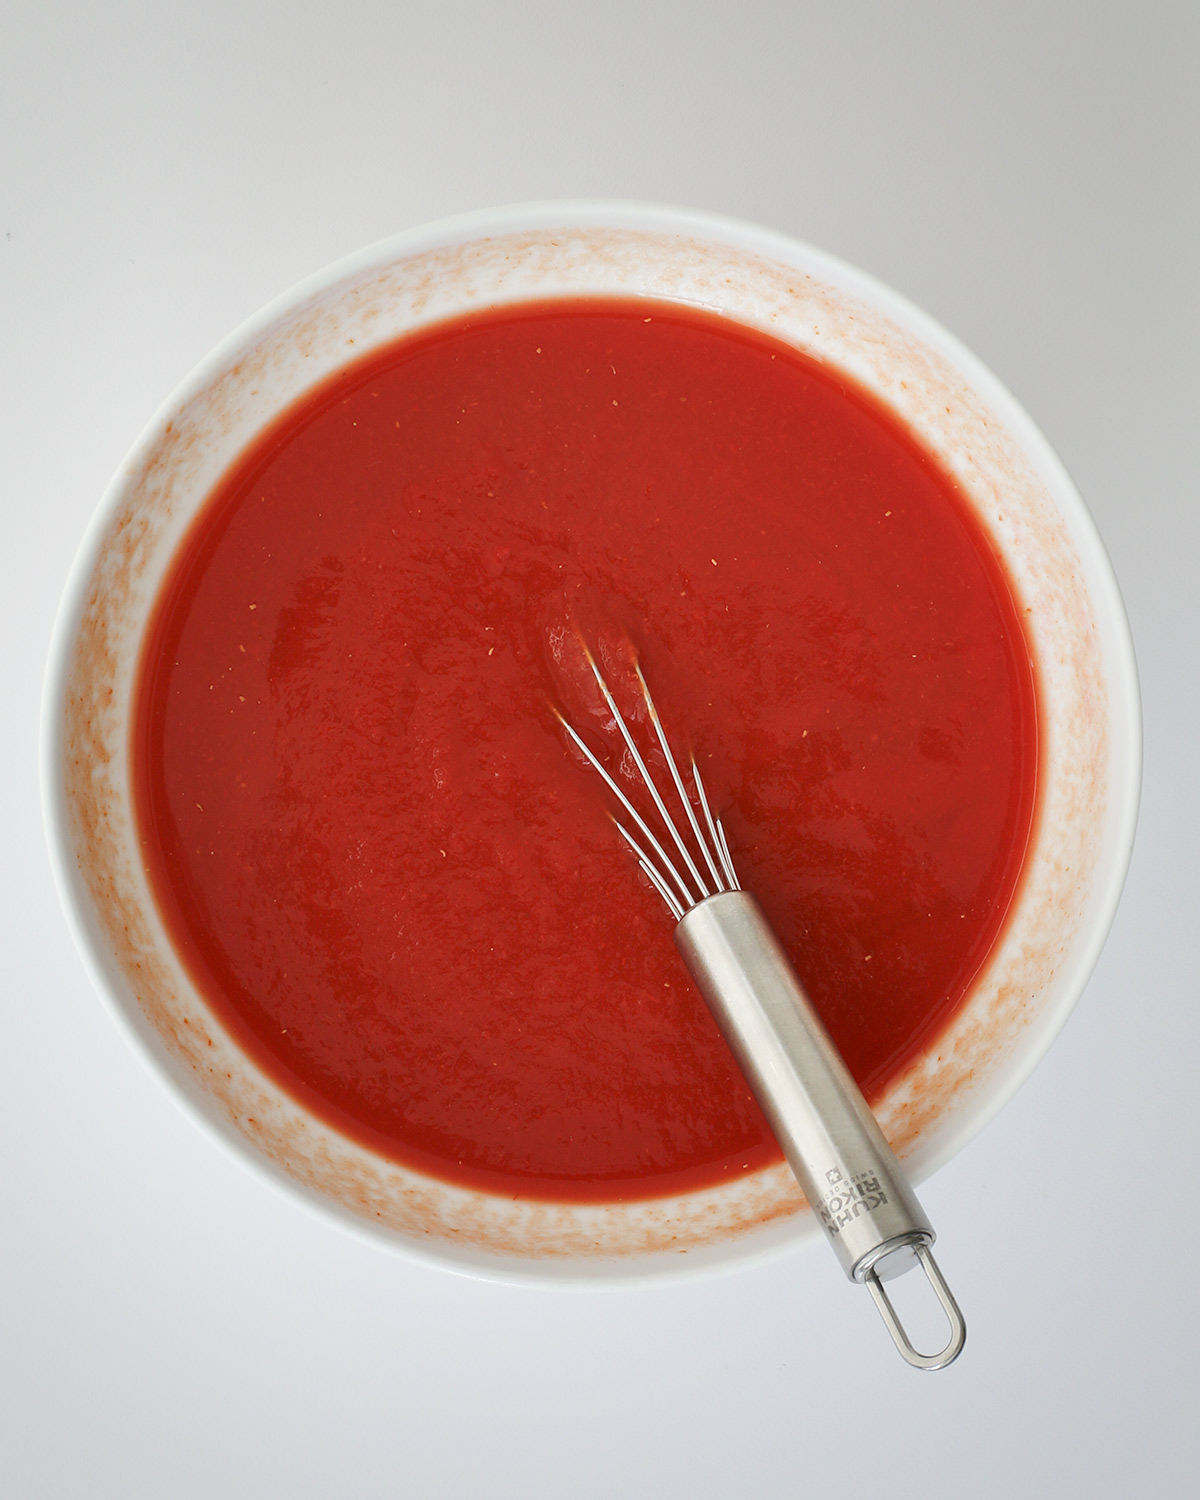 water and tomato paste whisked together in a white bowl.